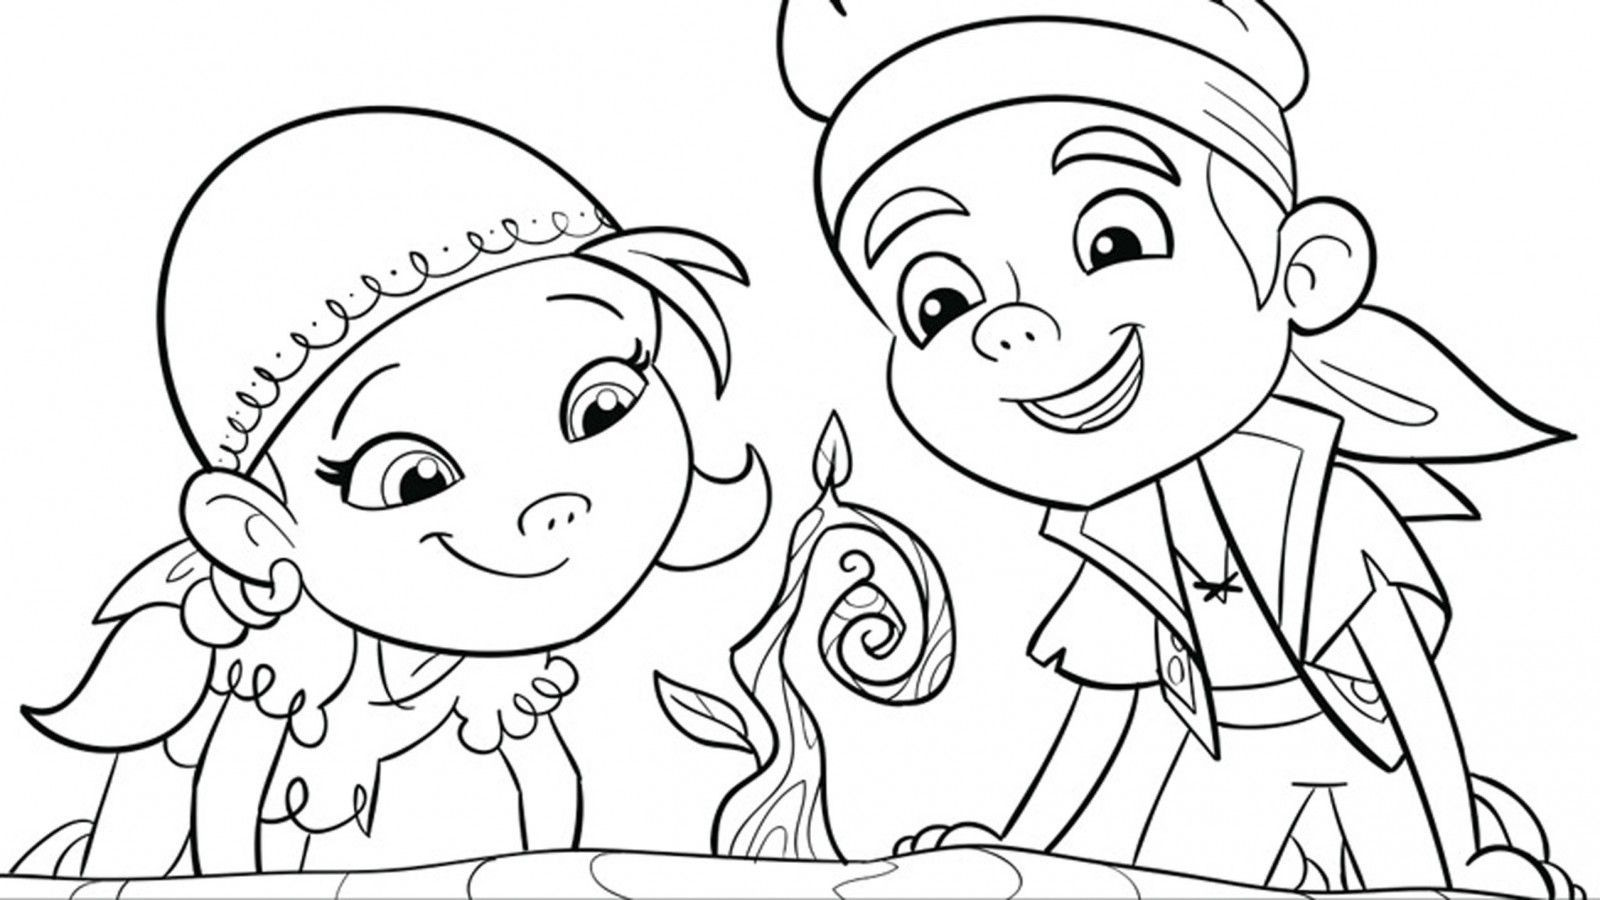 Disney Coloring Pages For Boys
 disney coloring pages for